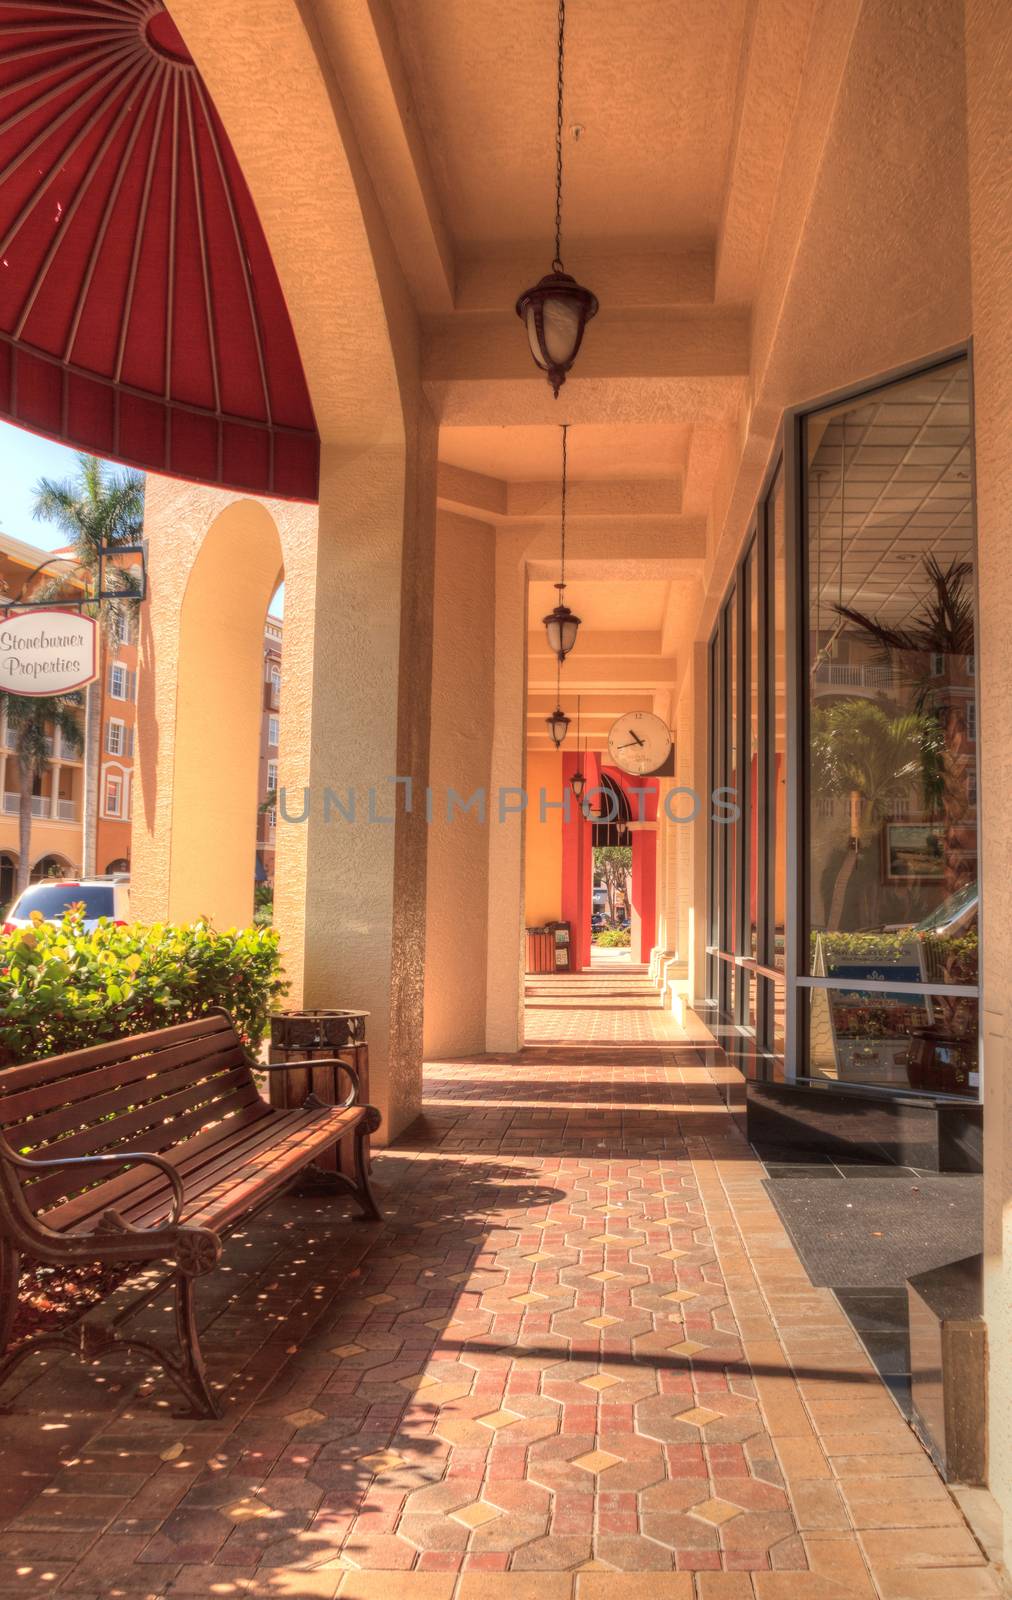 Naples, Florida, USA – April 29, 2018: Colorful hallway and foyer along 3rd street along the harbor in Naples, Florida